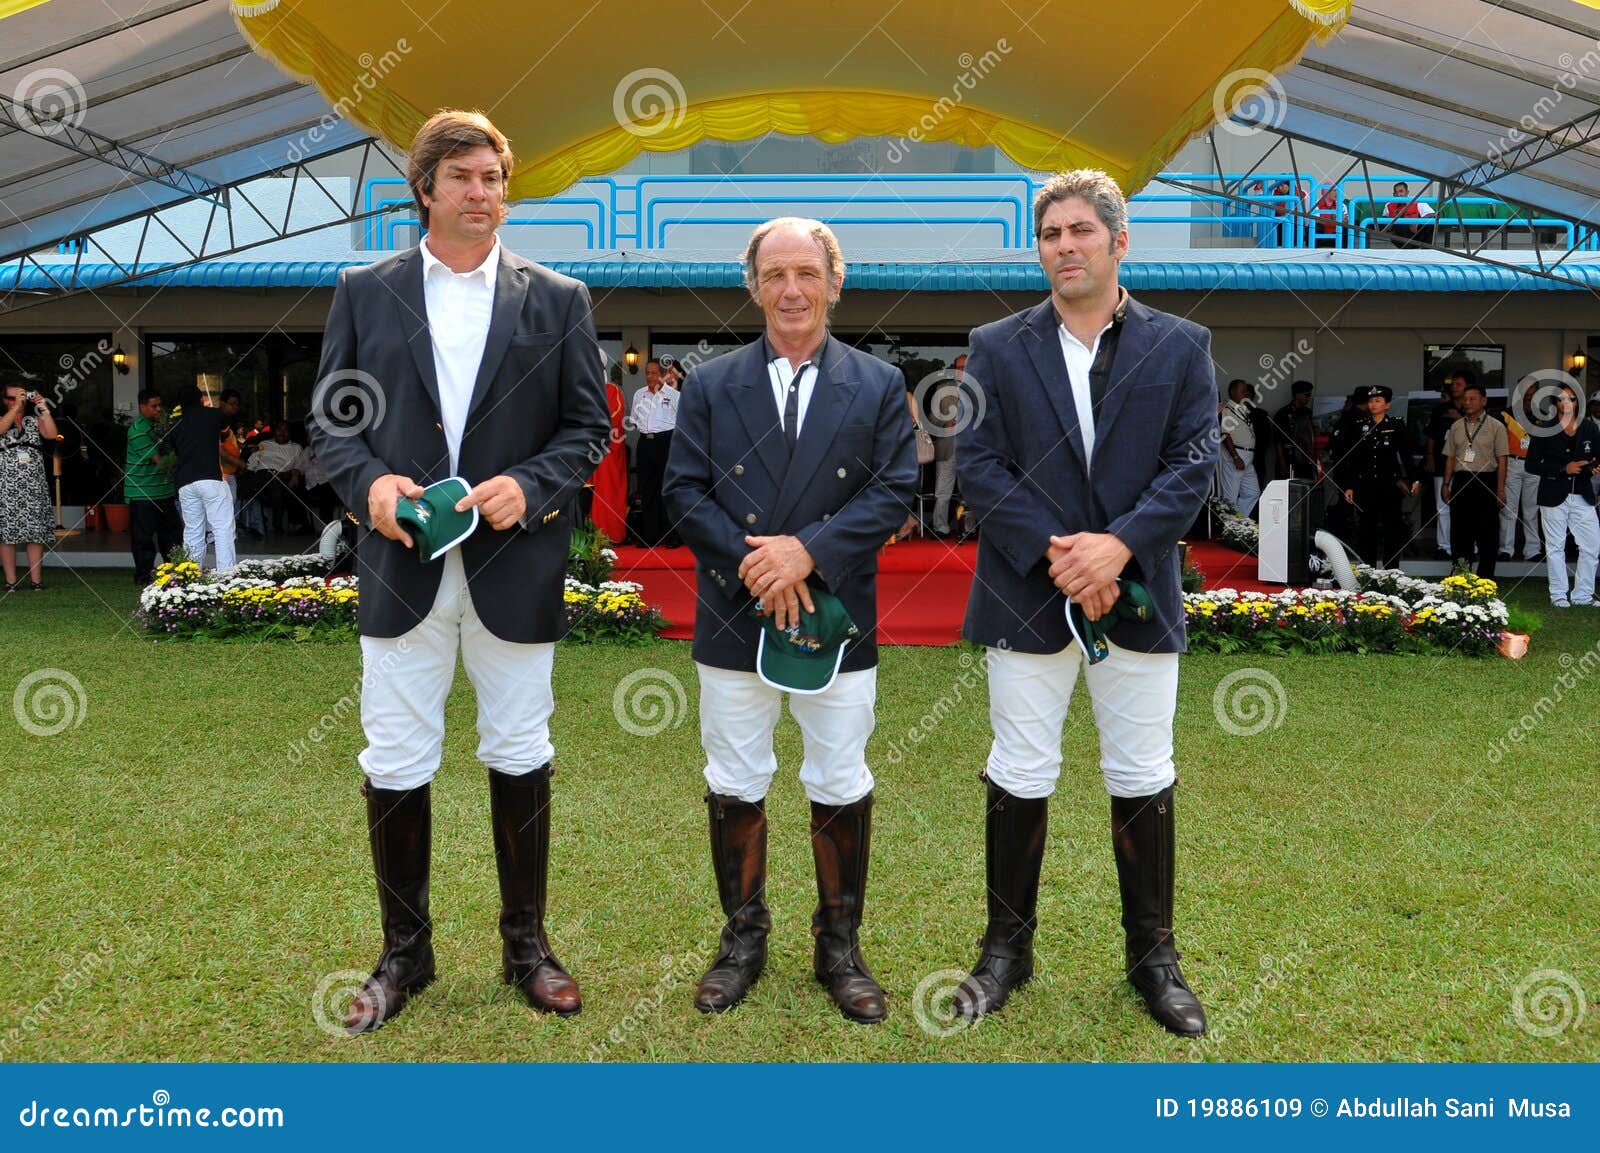  - 2011-fip-polo-world-cup-19886109